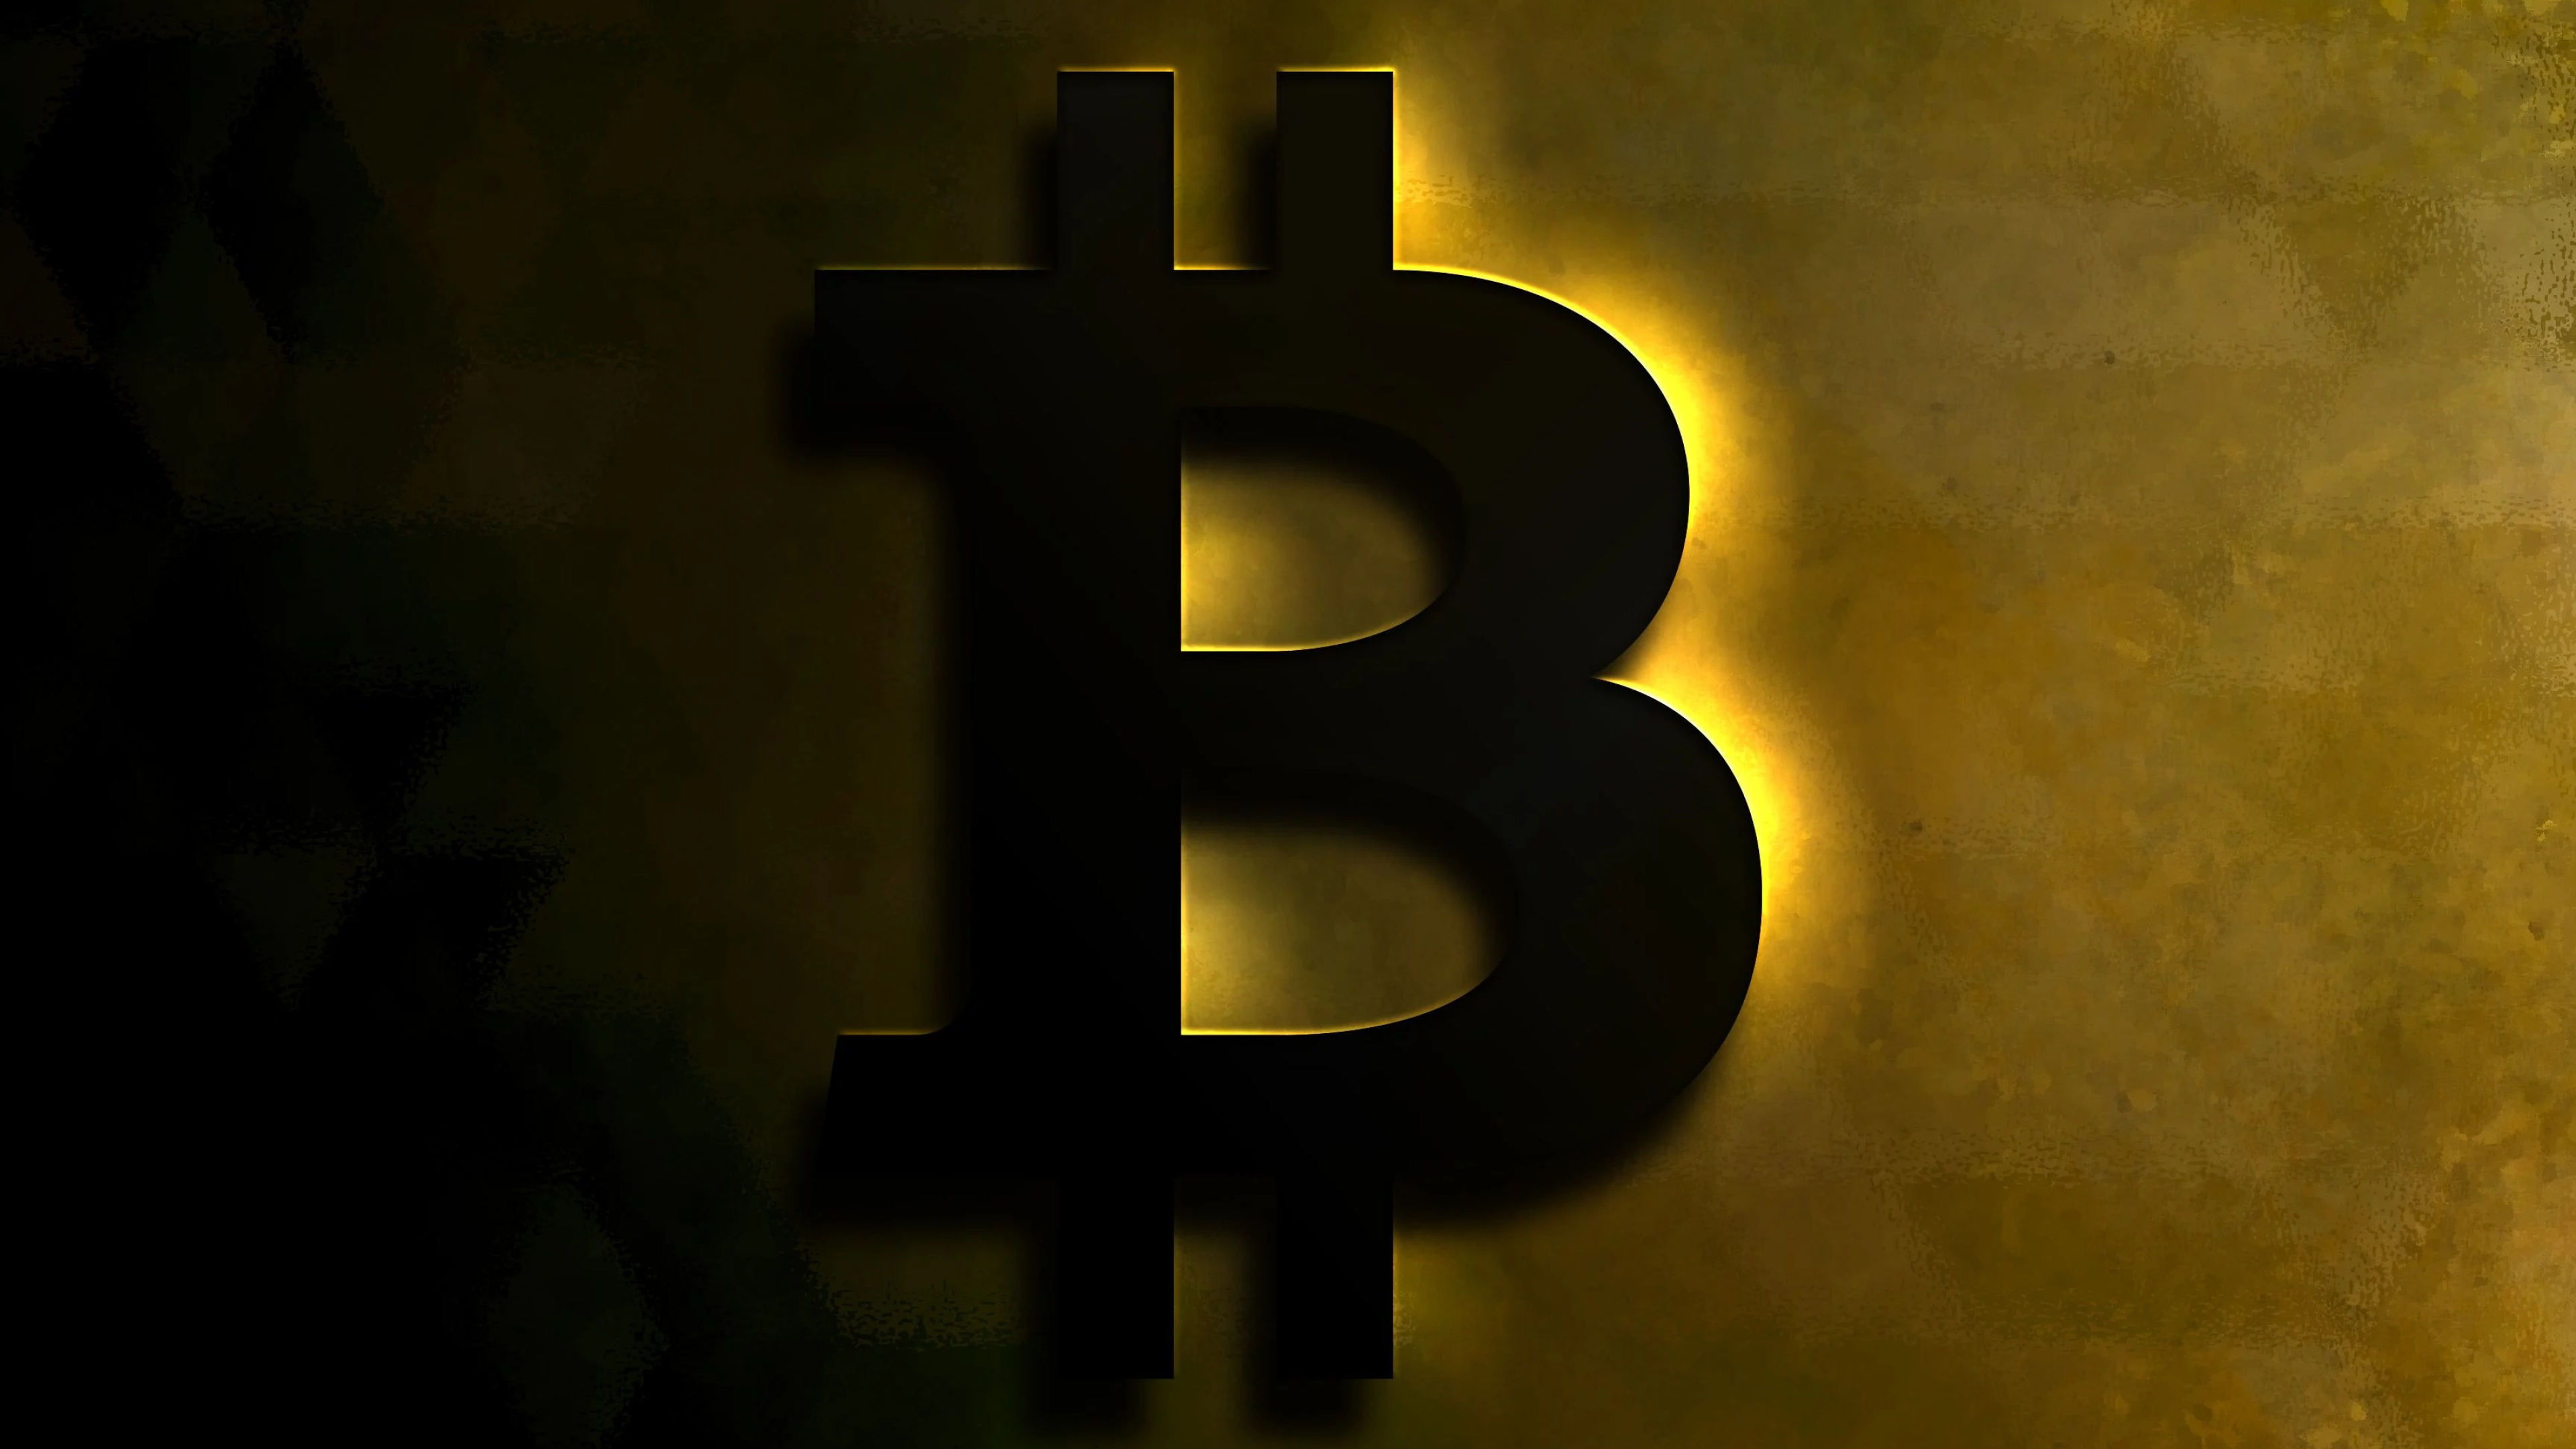 Satoshi Nakamoto: Released version 0.1 of the Bitcoin software on SourceForge, 9 January 2009. 3840x2160 4K Background.